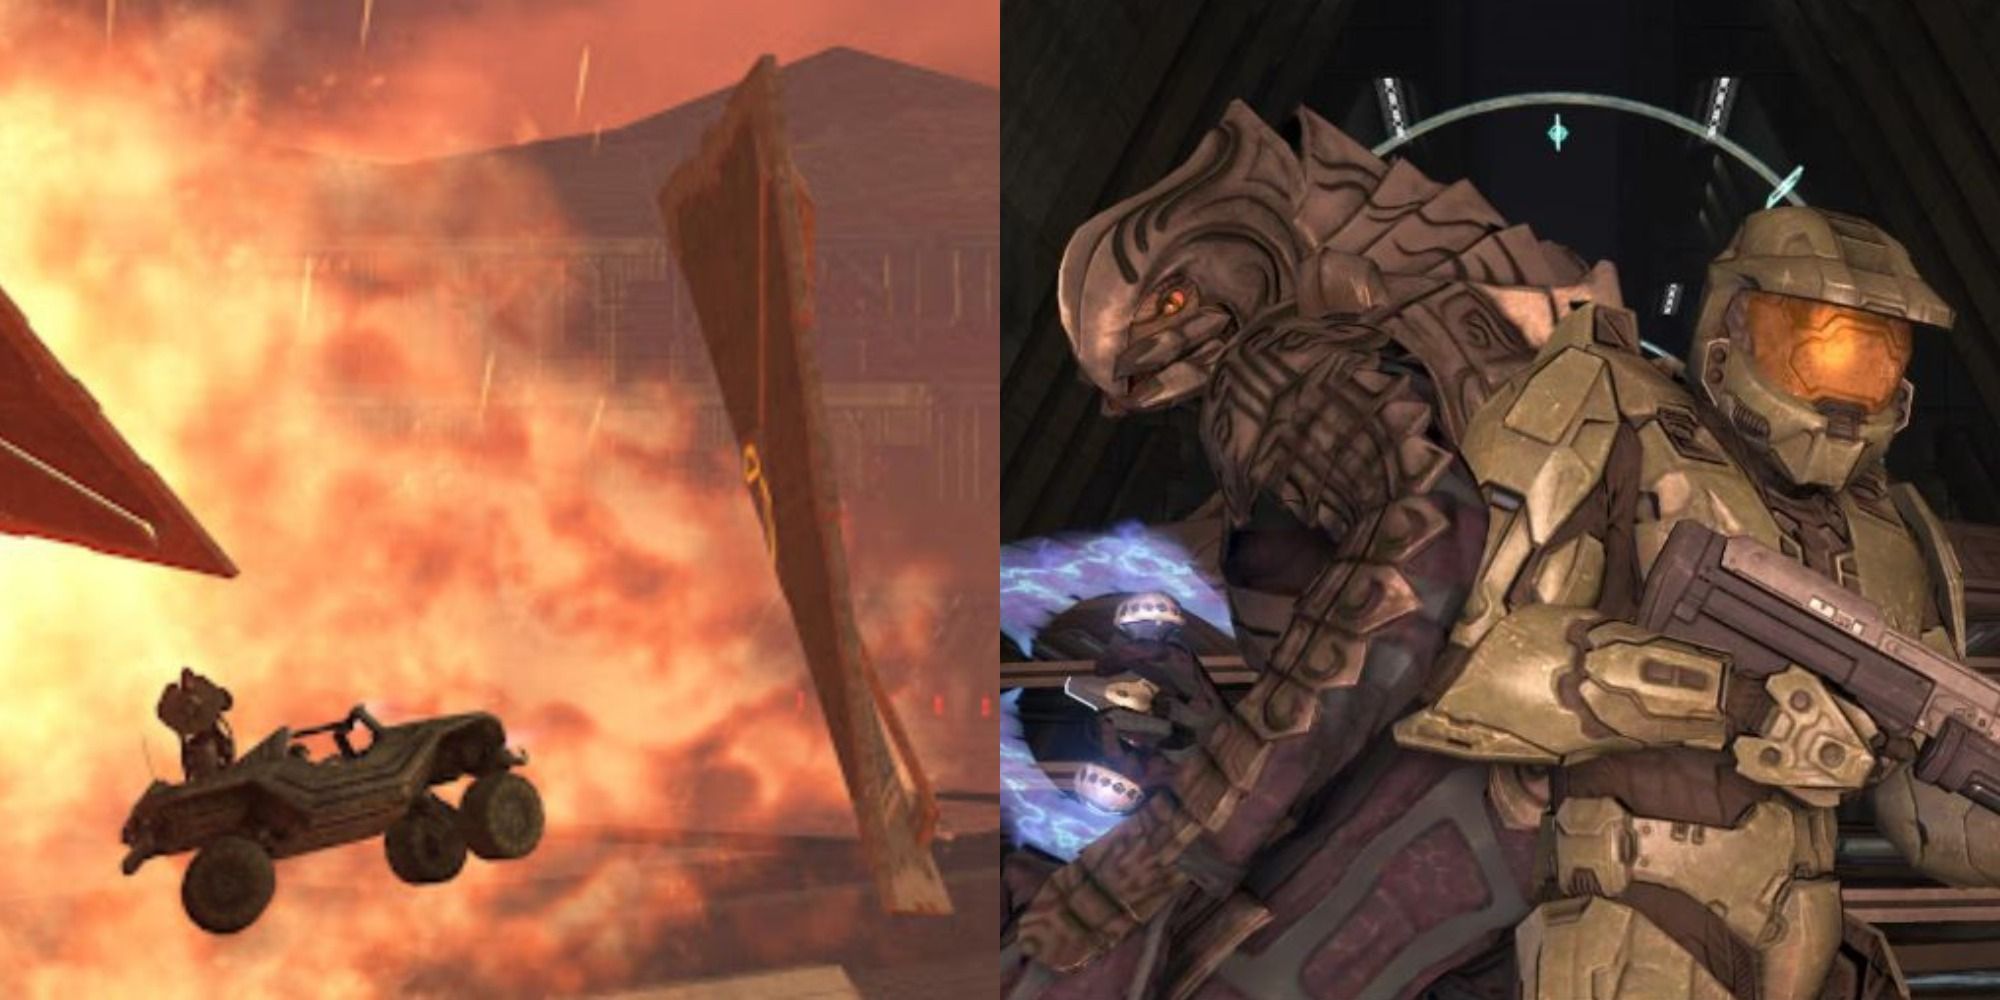 Split image of the warthog jumping into fire and Master Chief standing with the Arbiter